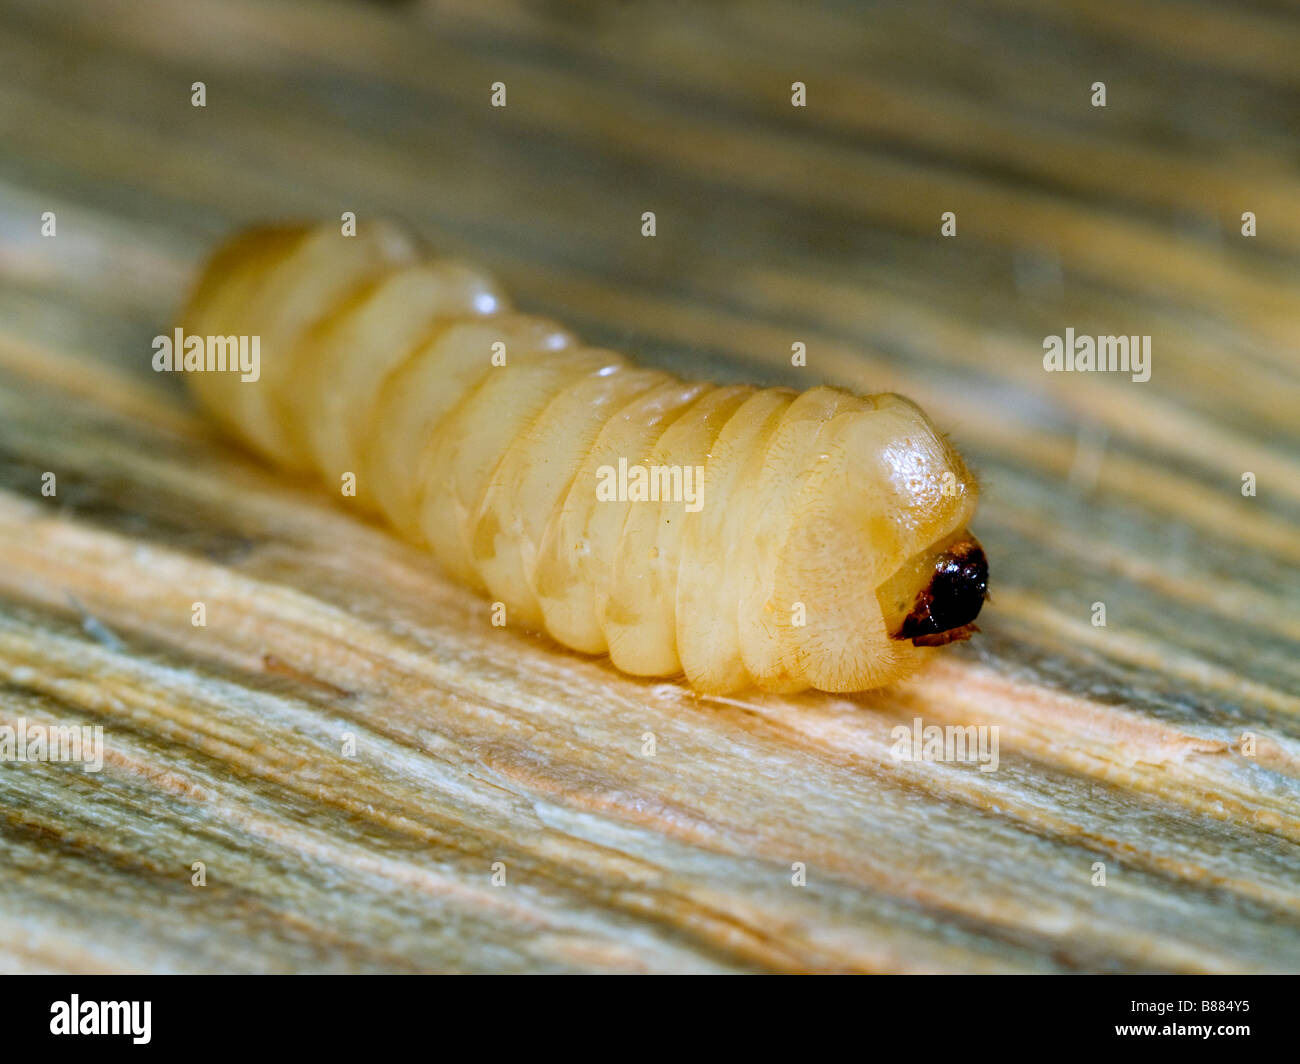 Larva of a woodworm beetle found in oak. Surrey, England, UK. Stock Photo